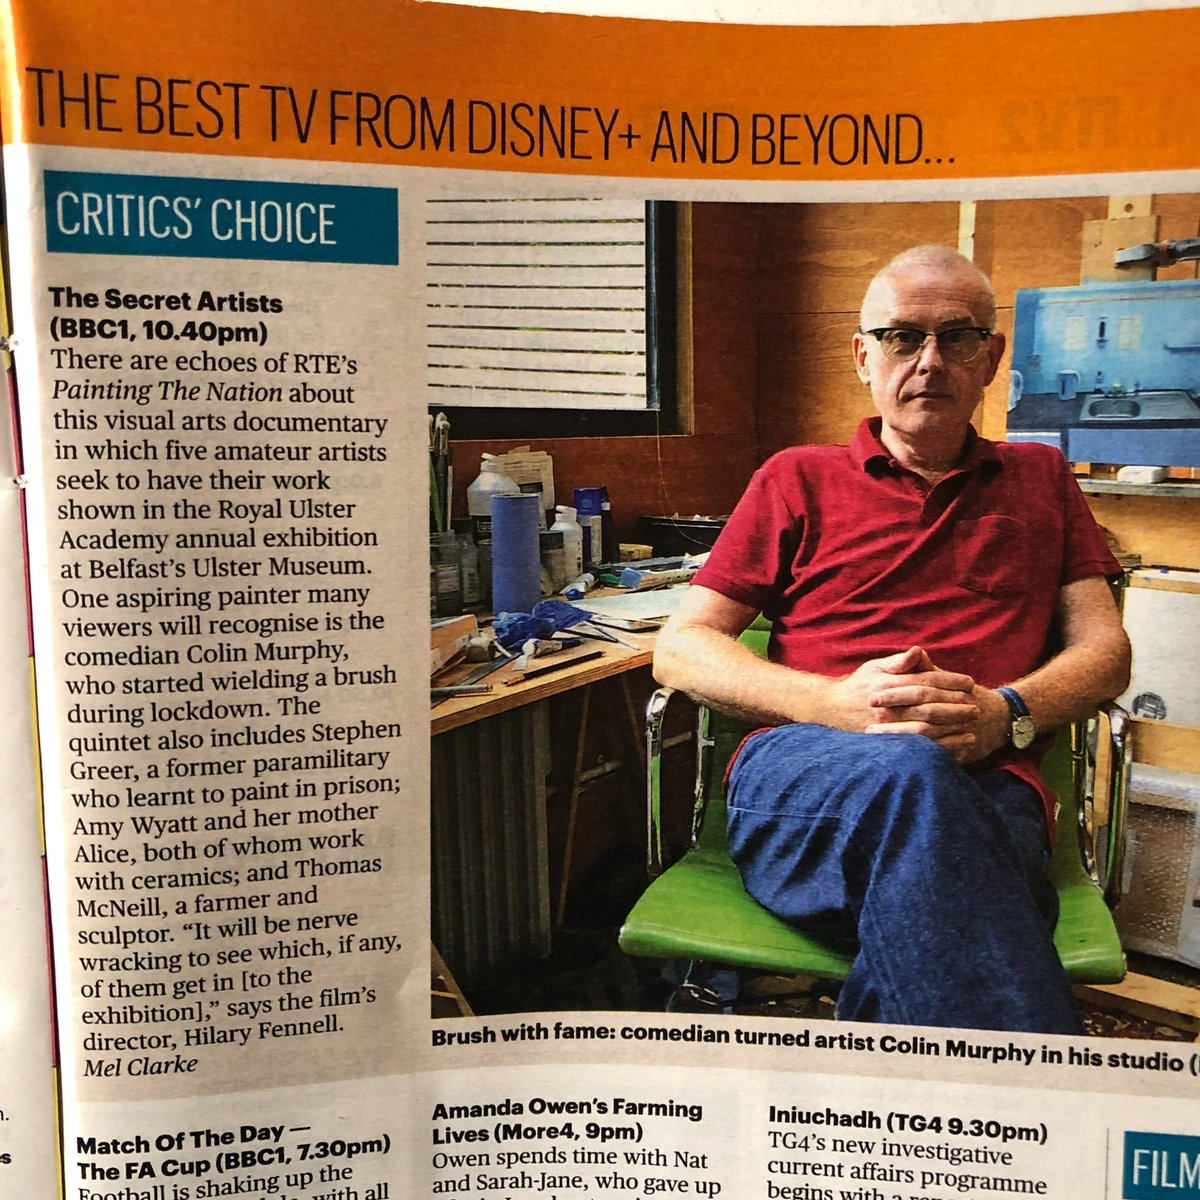 Thanks to @thesundaytimes_ for making my latest documentary #TheSecretArtists their critics’ choice! Pls spread the word - its on @BBCOneNI Weds 10.40pm (or on iplayer in UK)